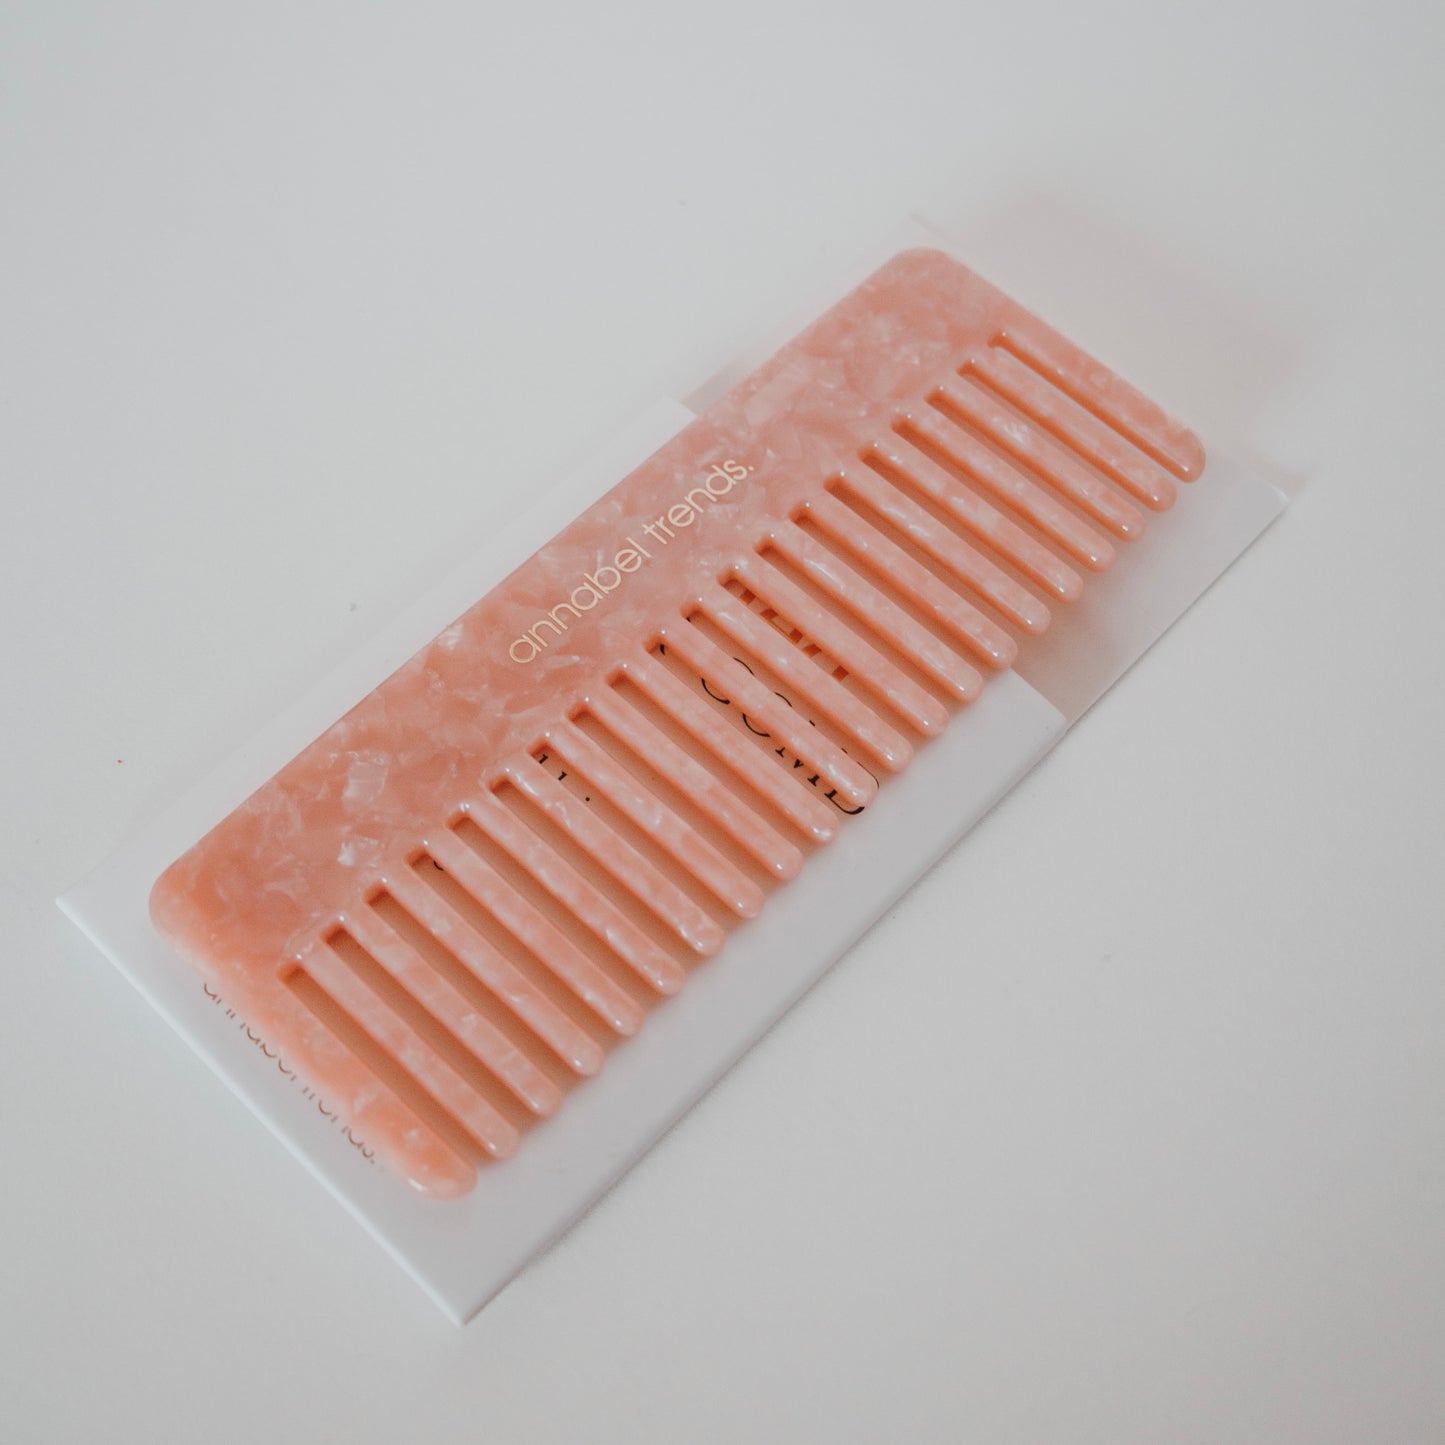 Pink Pearl Hair Comb